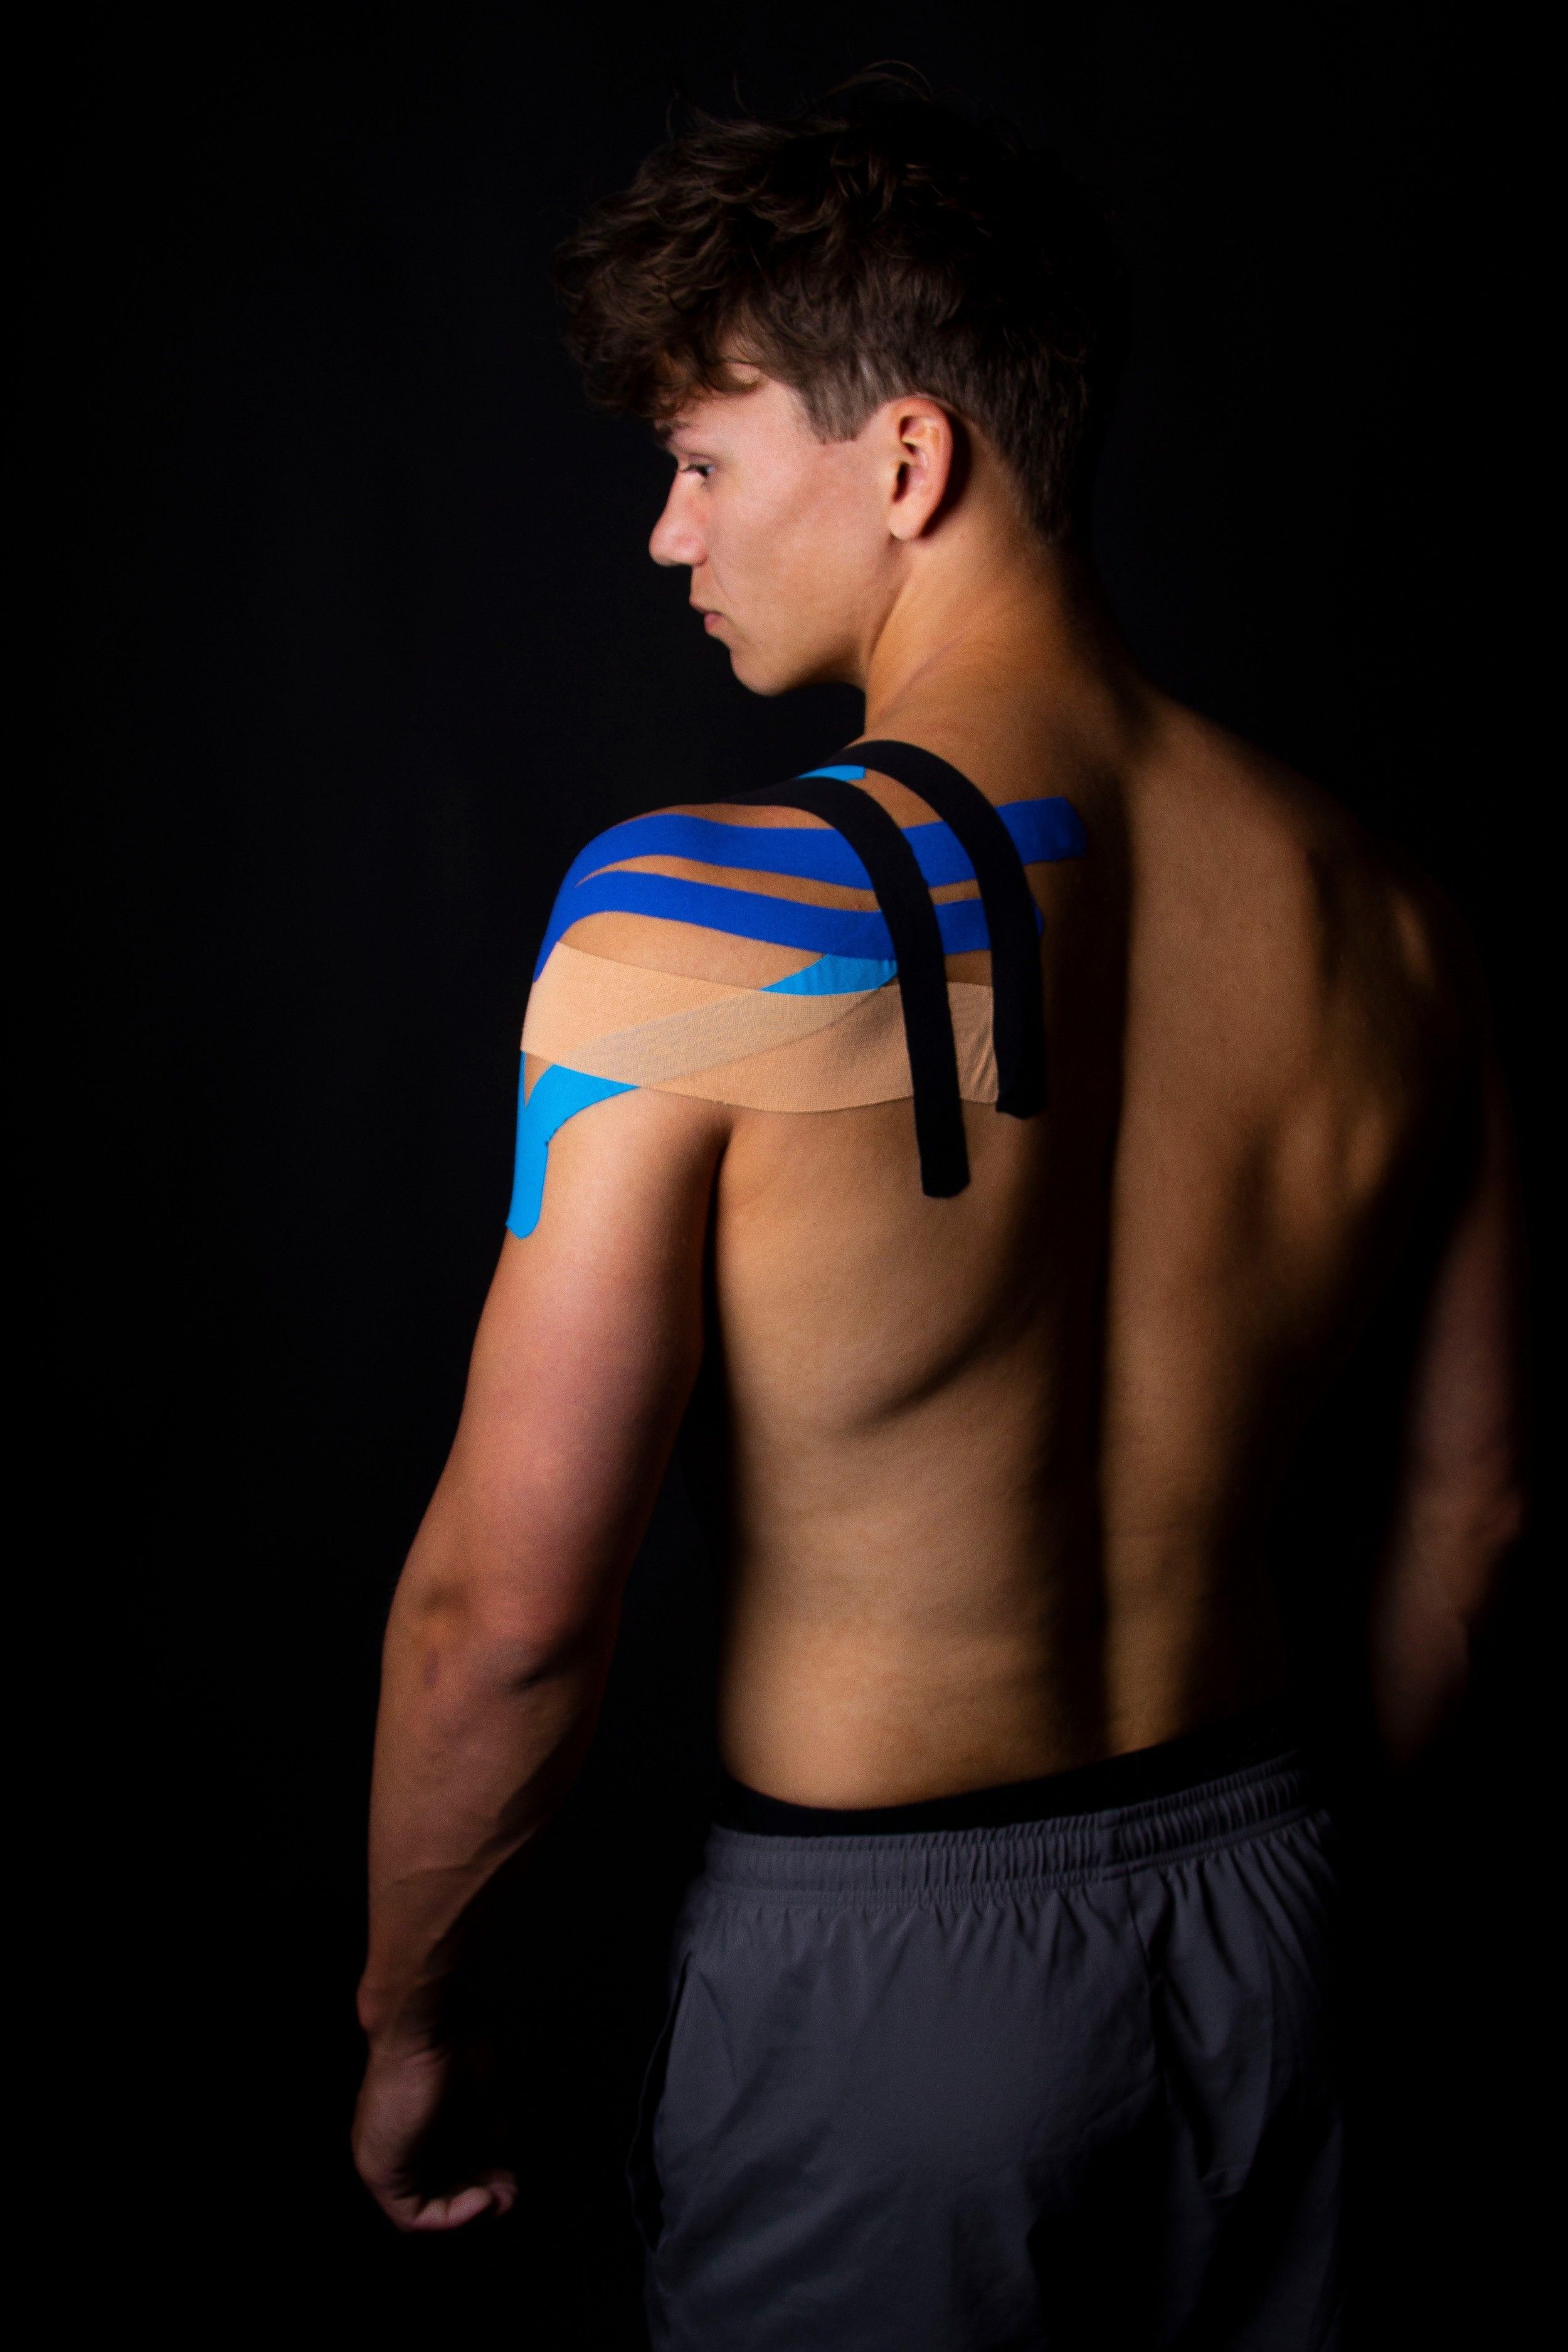 gladiator sports kinesiology strips worn on the back